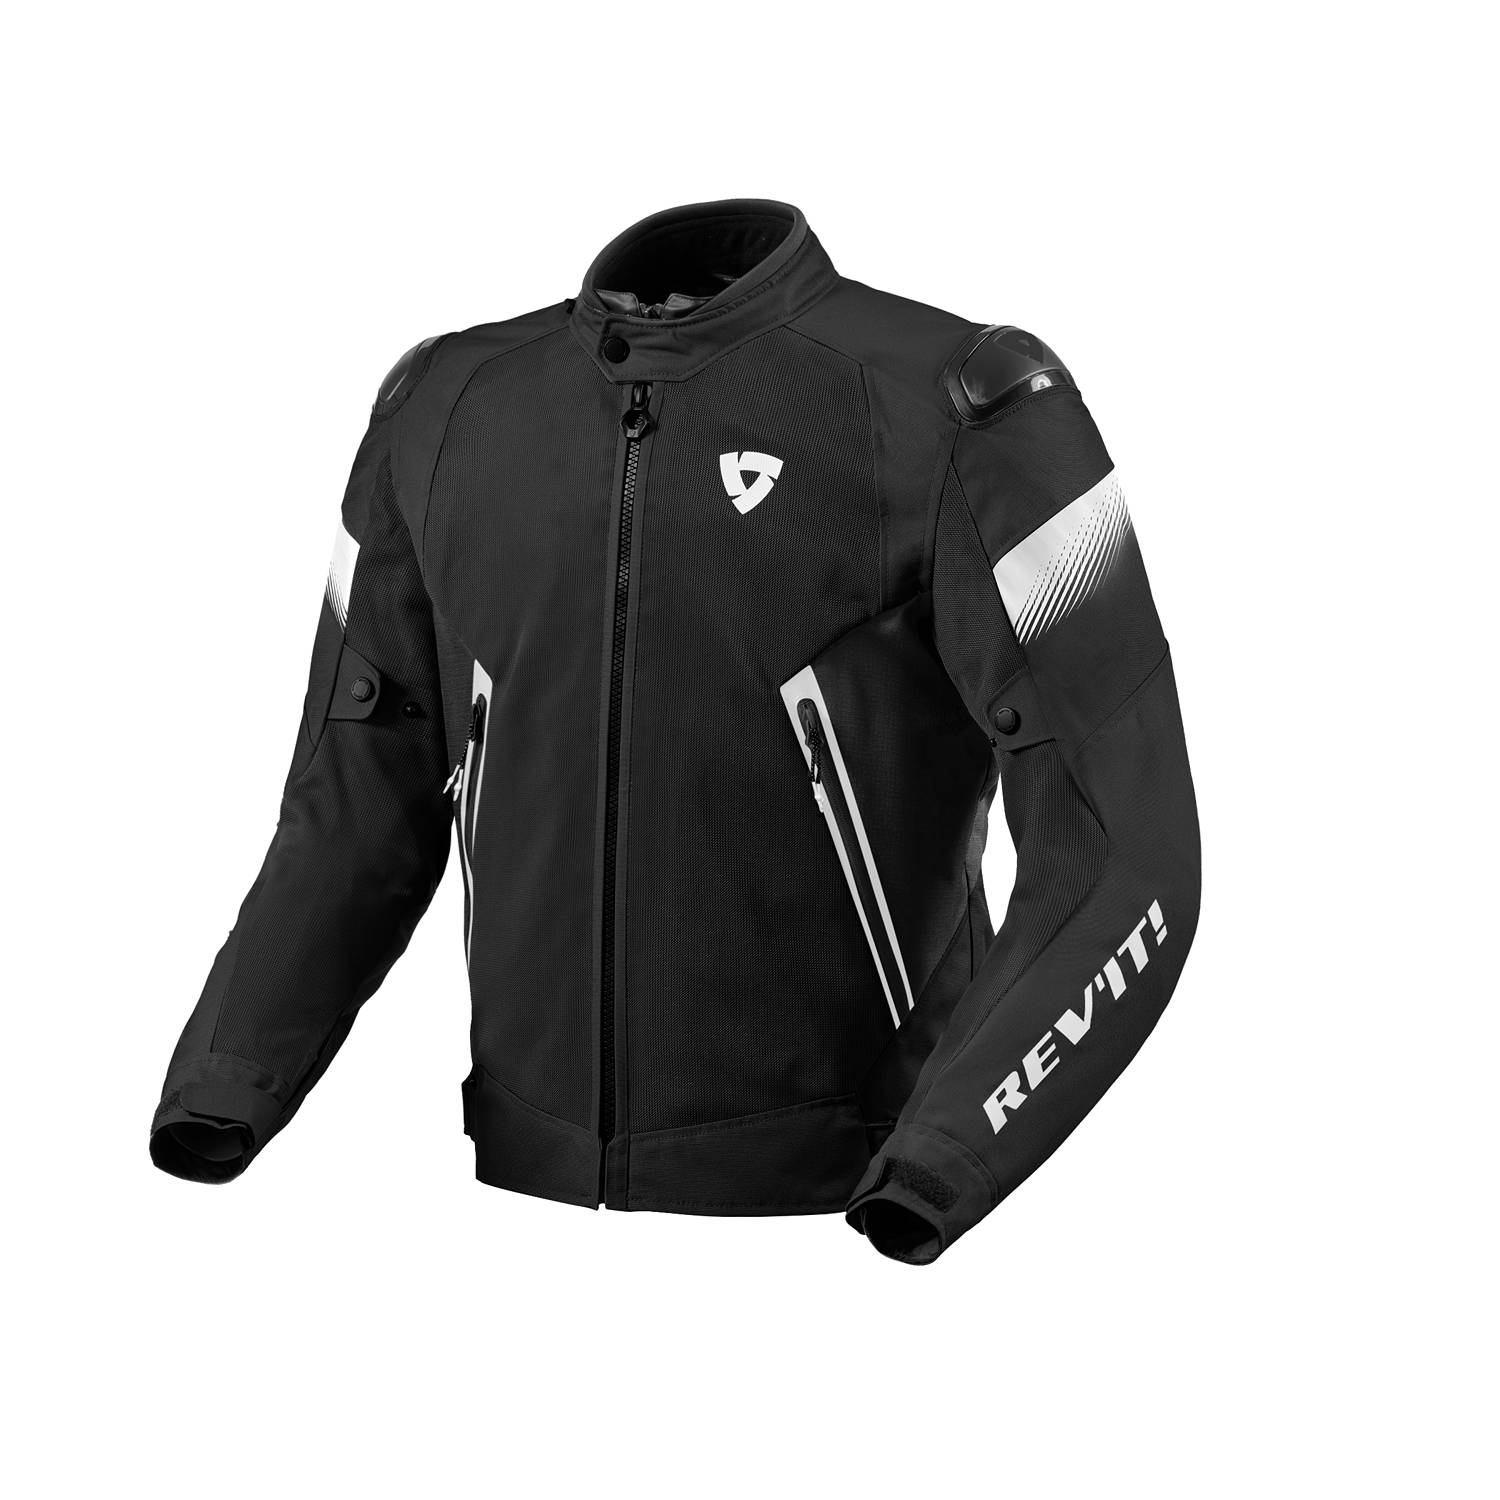 Image of REV'IT! Control Air H2O Jacket Black White Size S ID 8700001384889